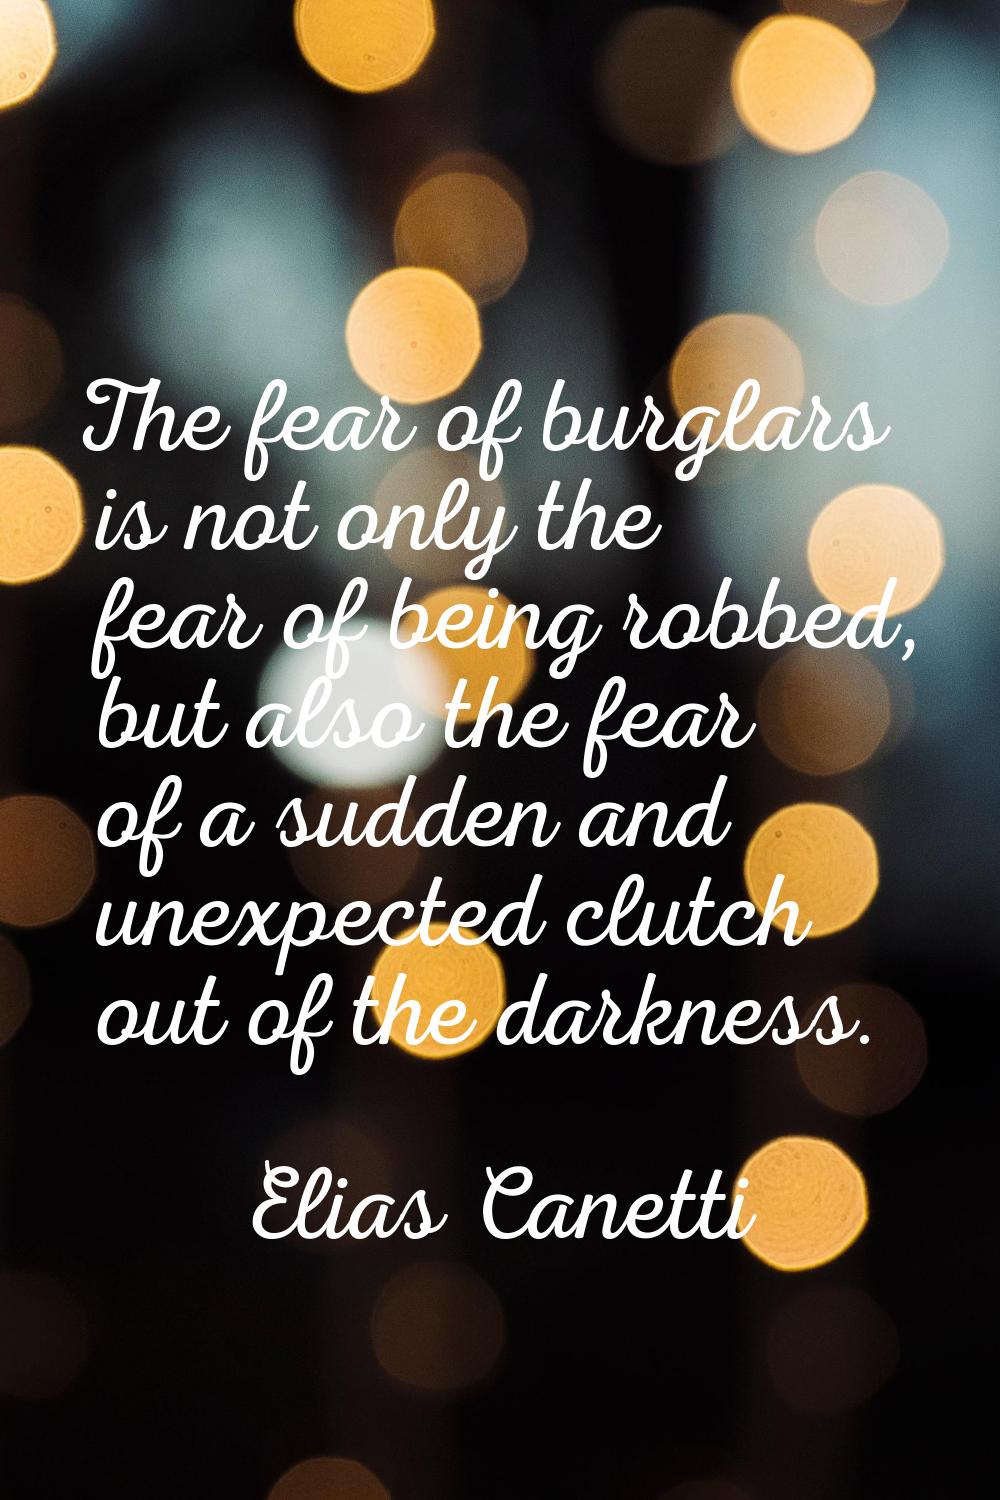 The fear of burglars is not only the fear of being robbed, but also the fear of a sudden and unexpe